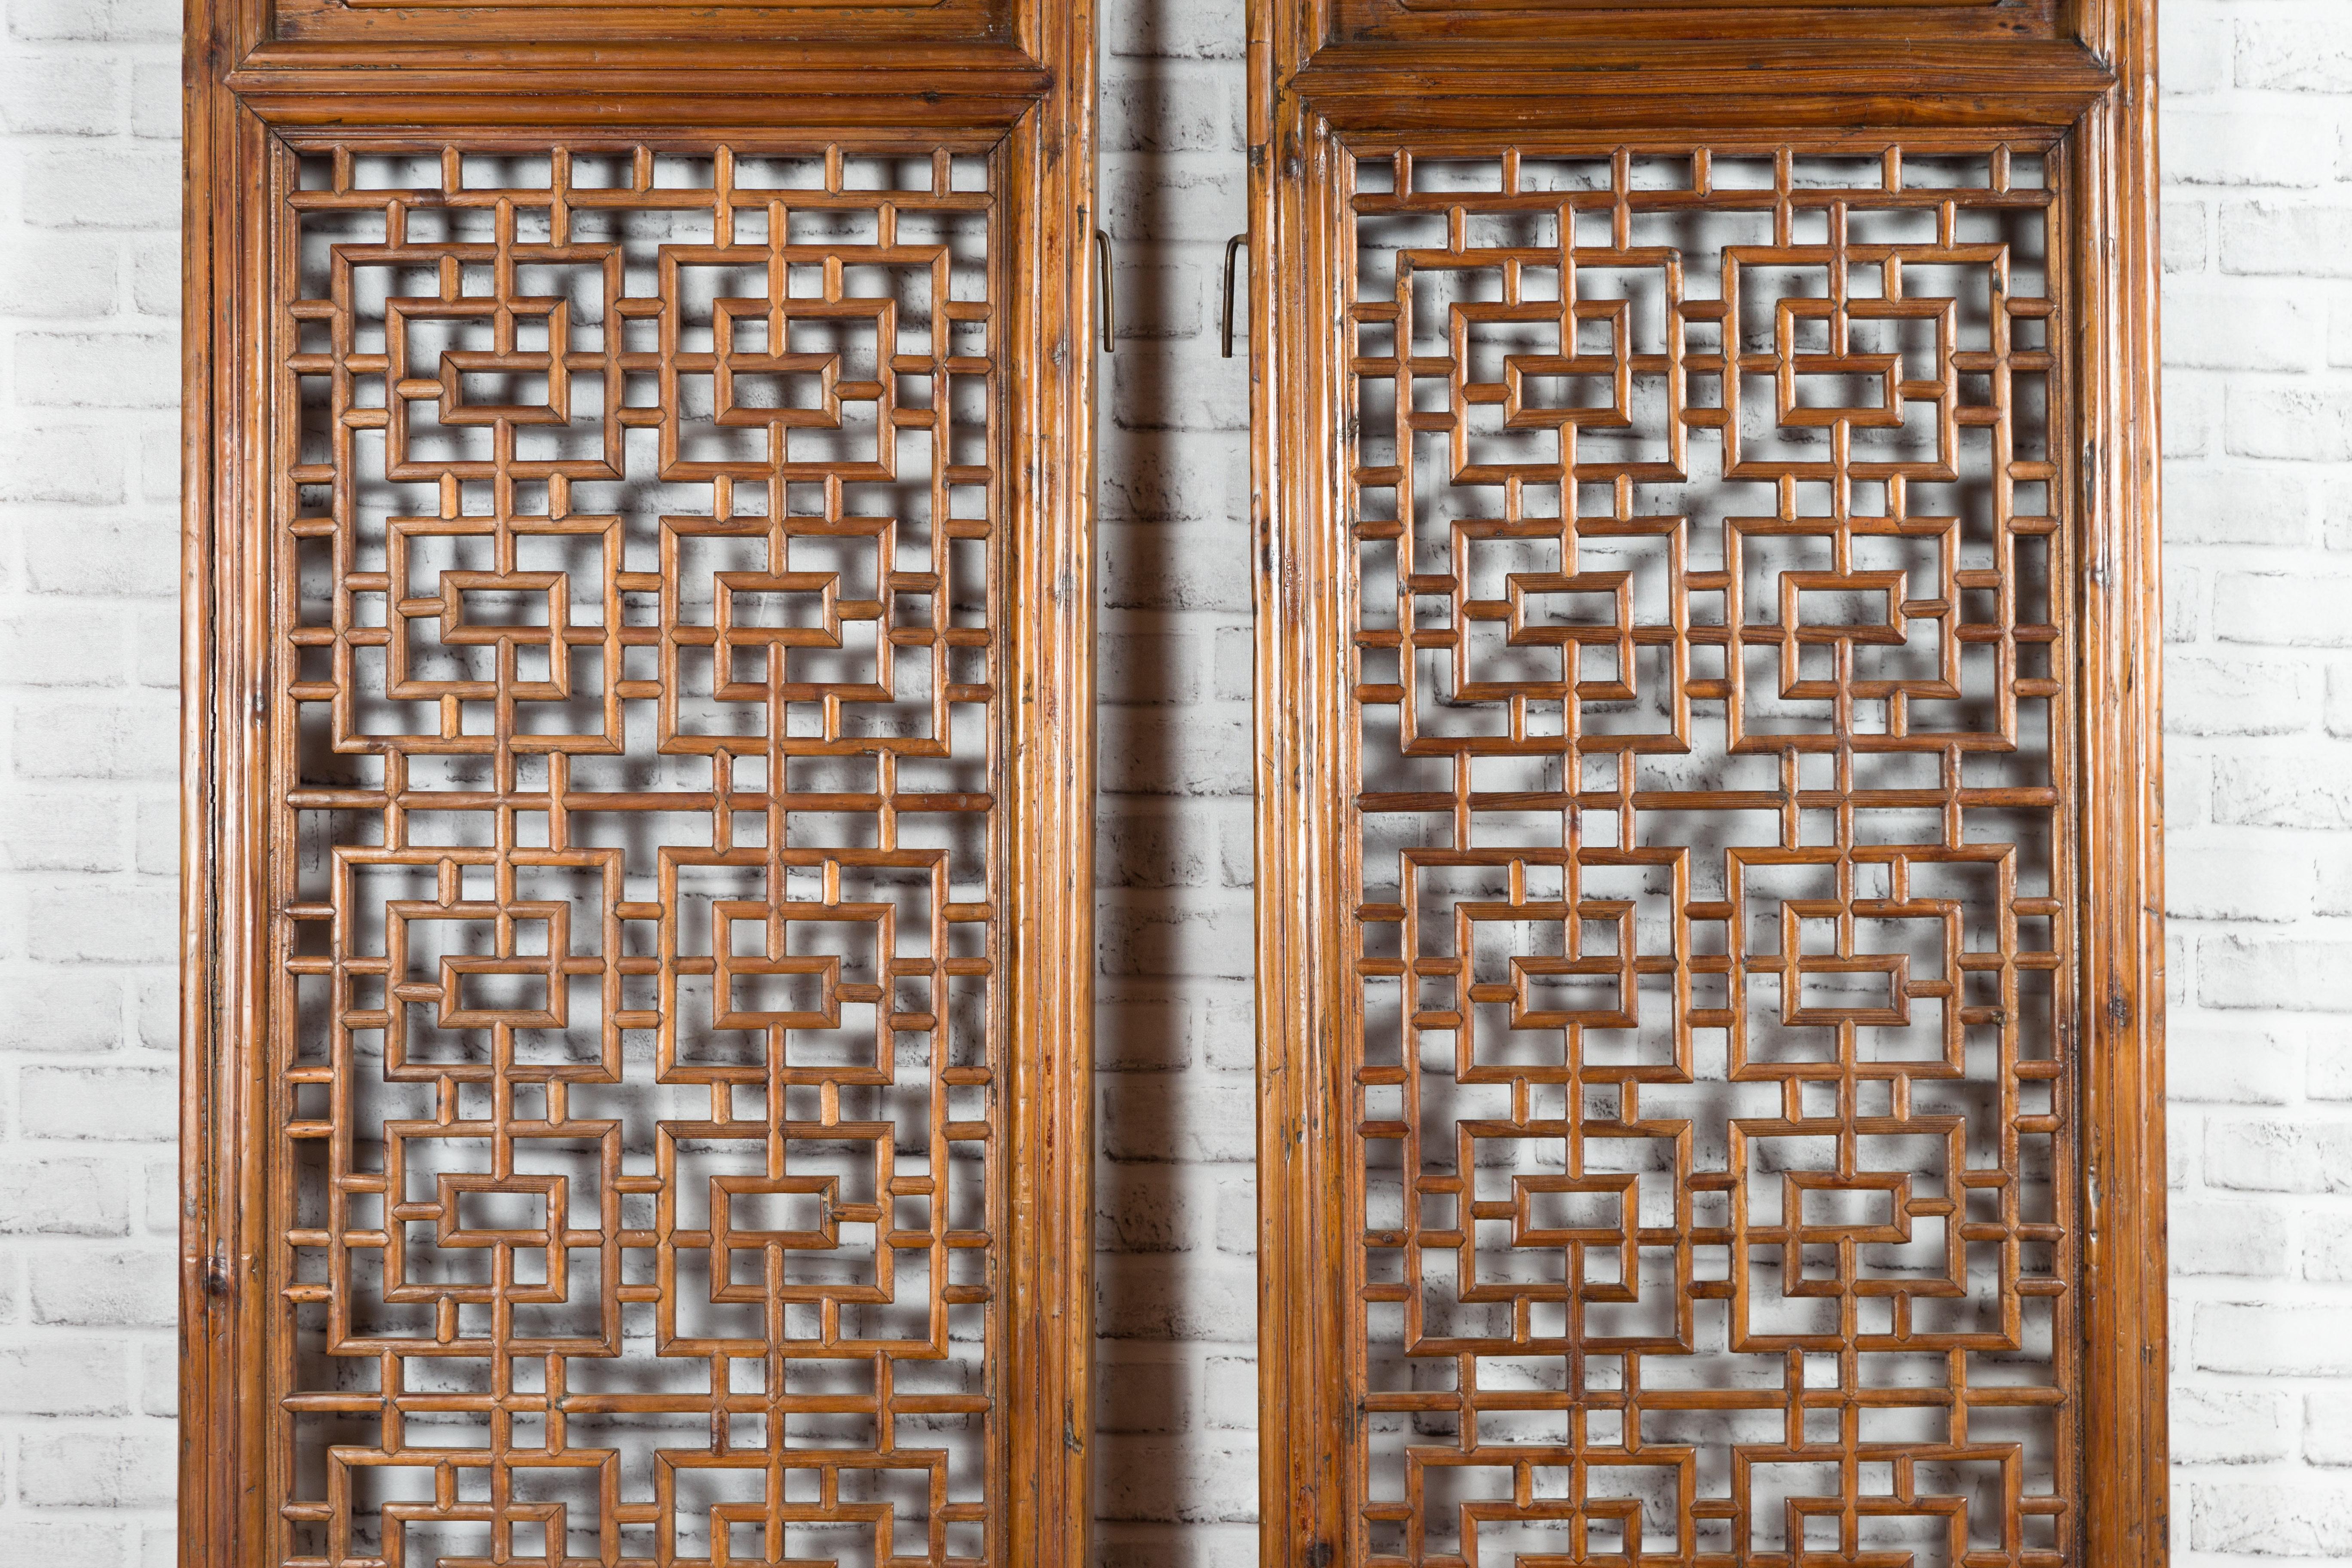 Wood Pair of Chinese 19th Century Screens with Fretwork and Low-Relief Carved Panels